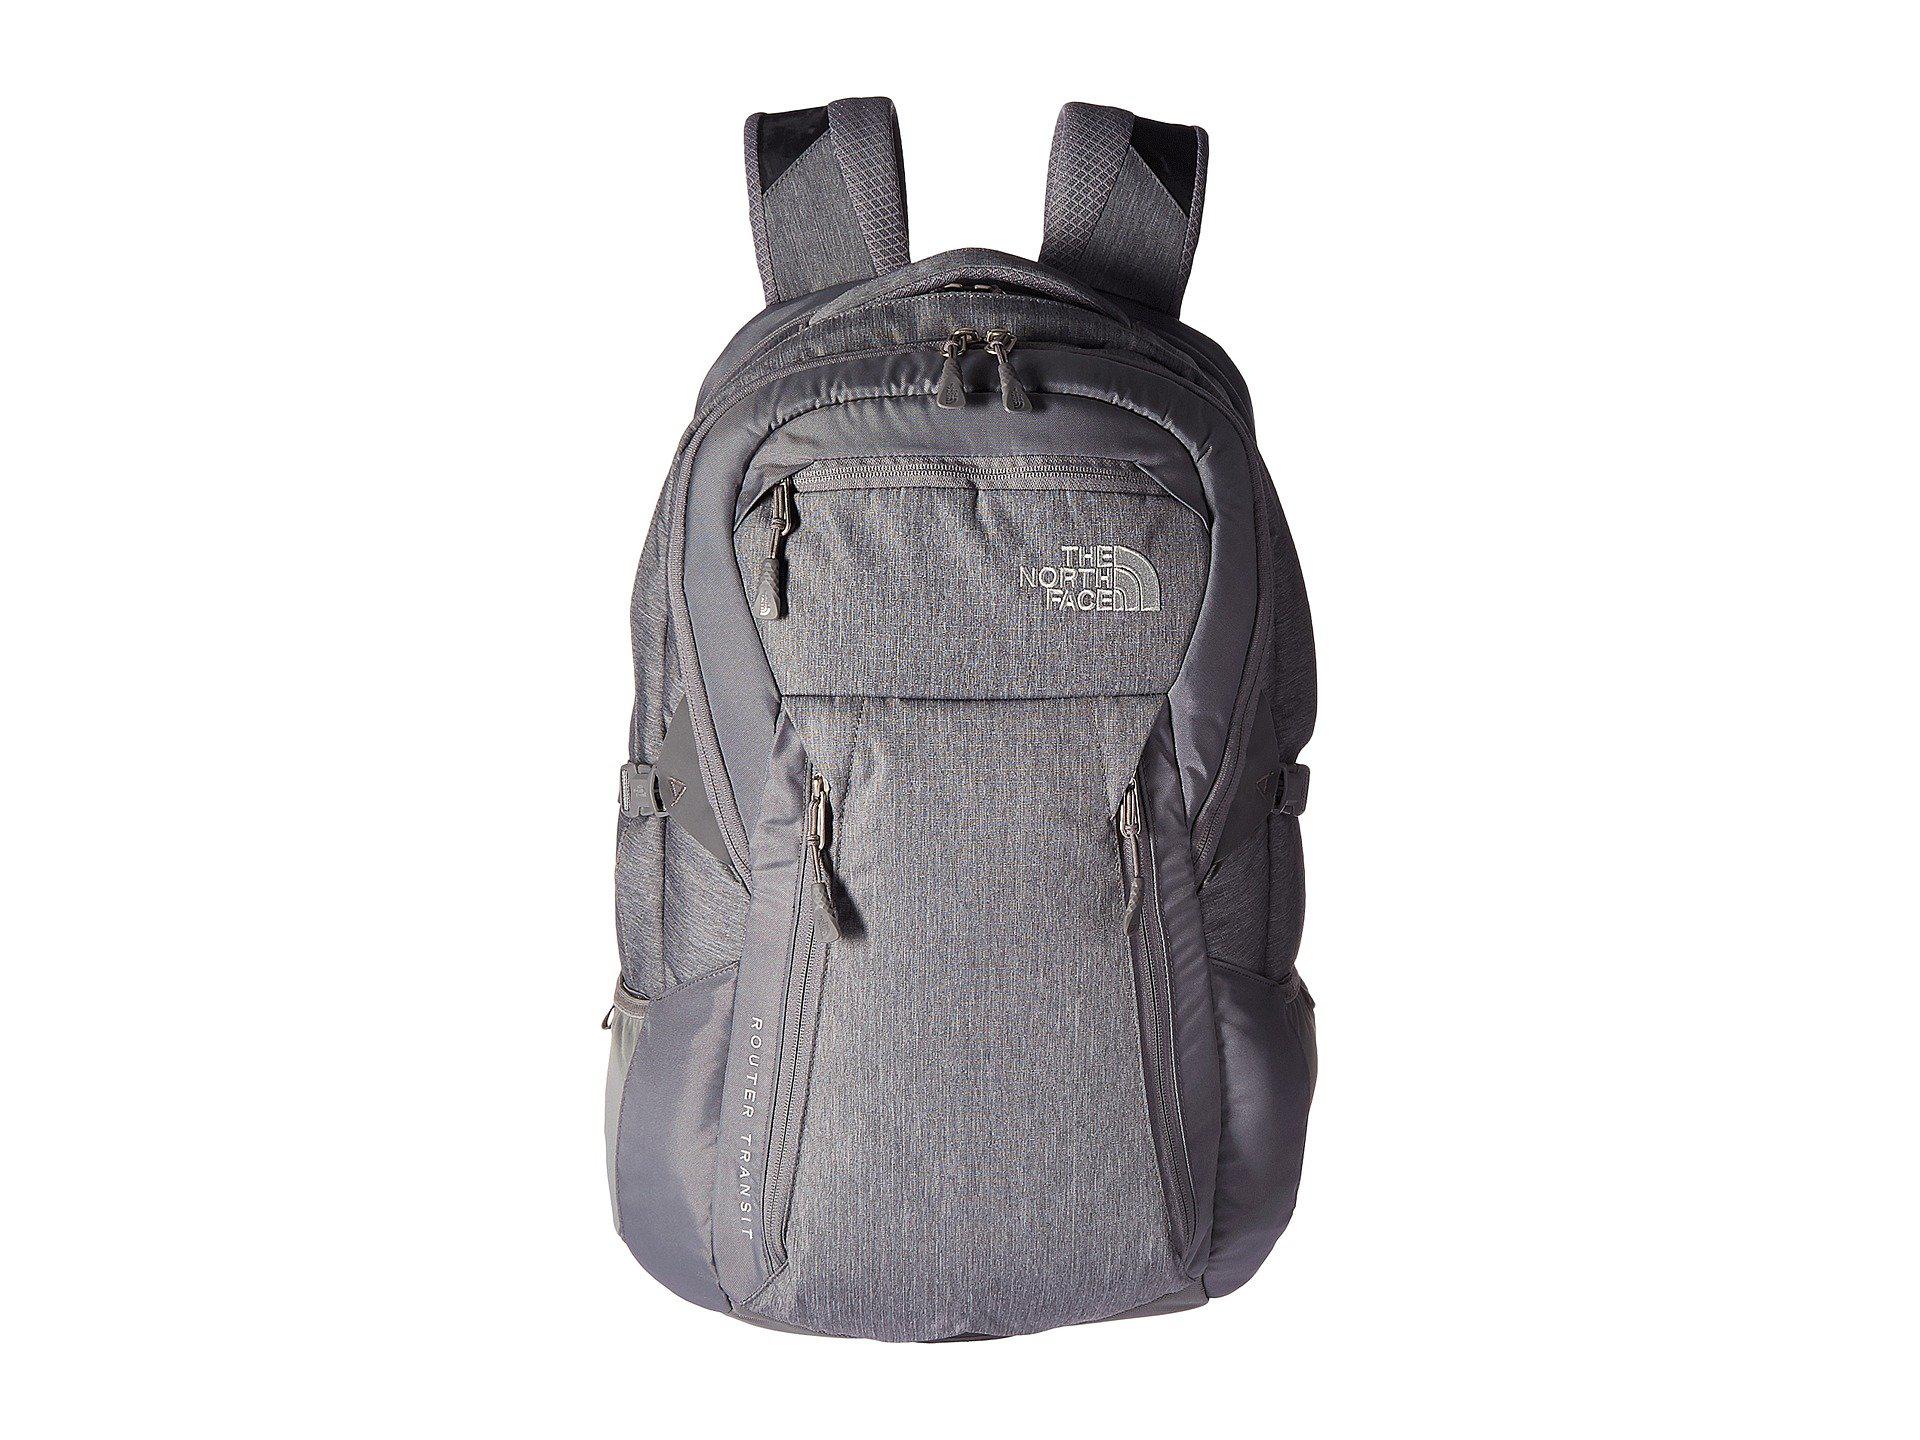 The North Face Fleece Router Transit Backpack in Gray for Men - Lyst